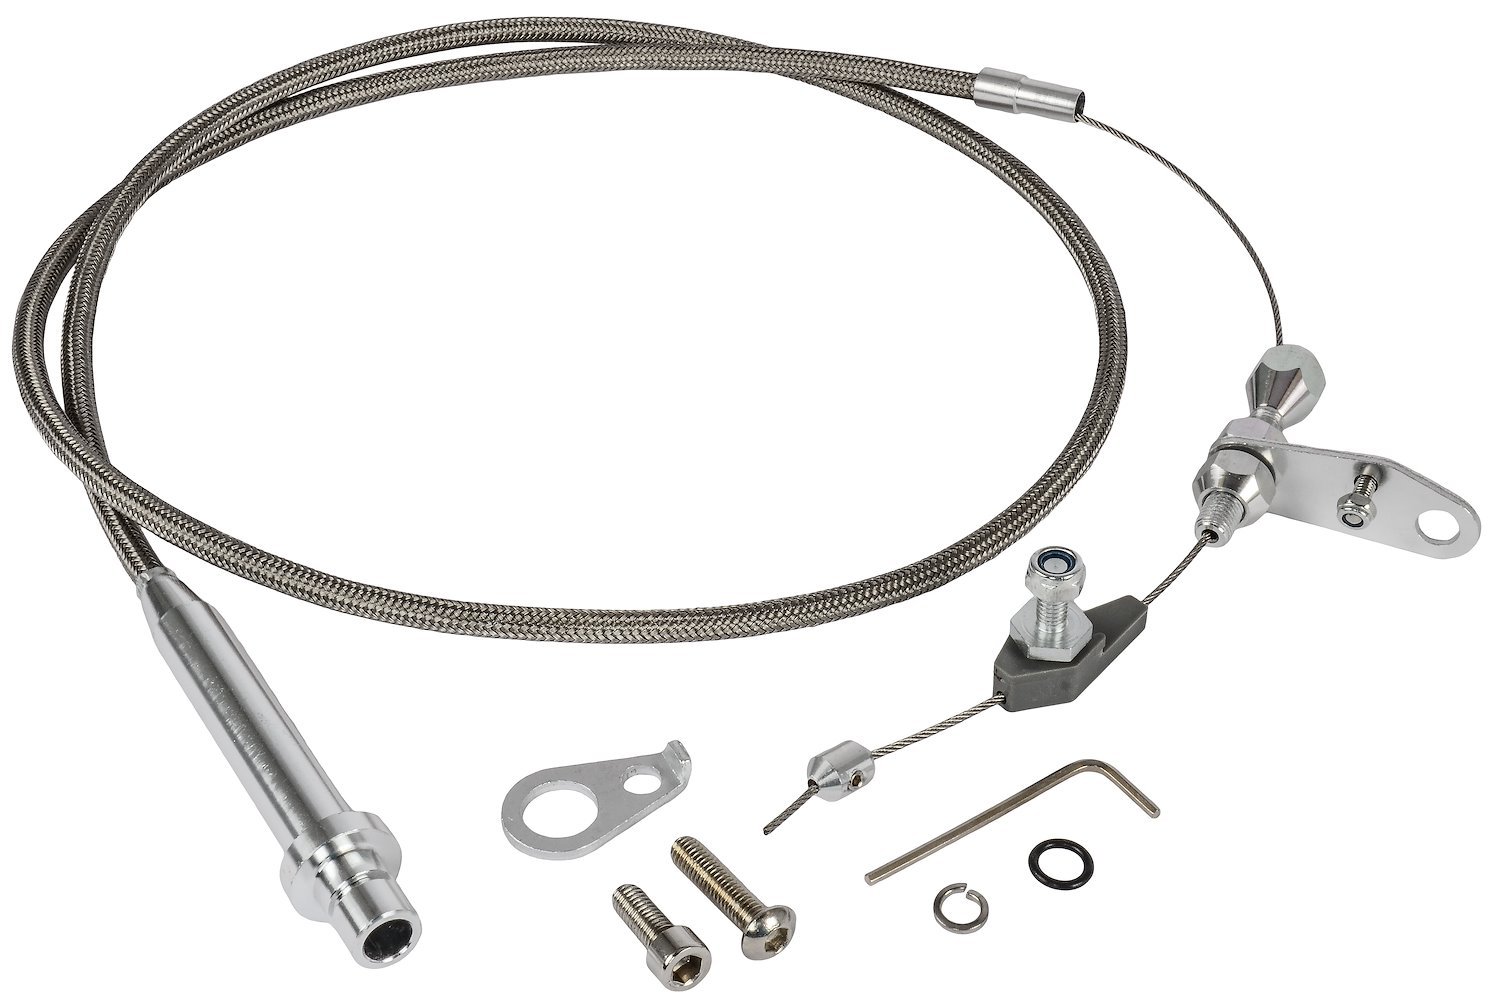 JEGS 157012: Transmission Kickdown Cable Kit Small Block GMC/Chevy TH350  Braided Stainless Steel Cable Jacket Includes: Aluminum Fittings   Polished Ferrule JEGS